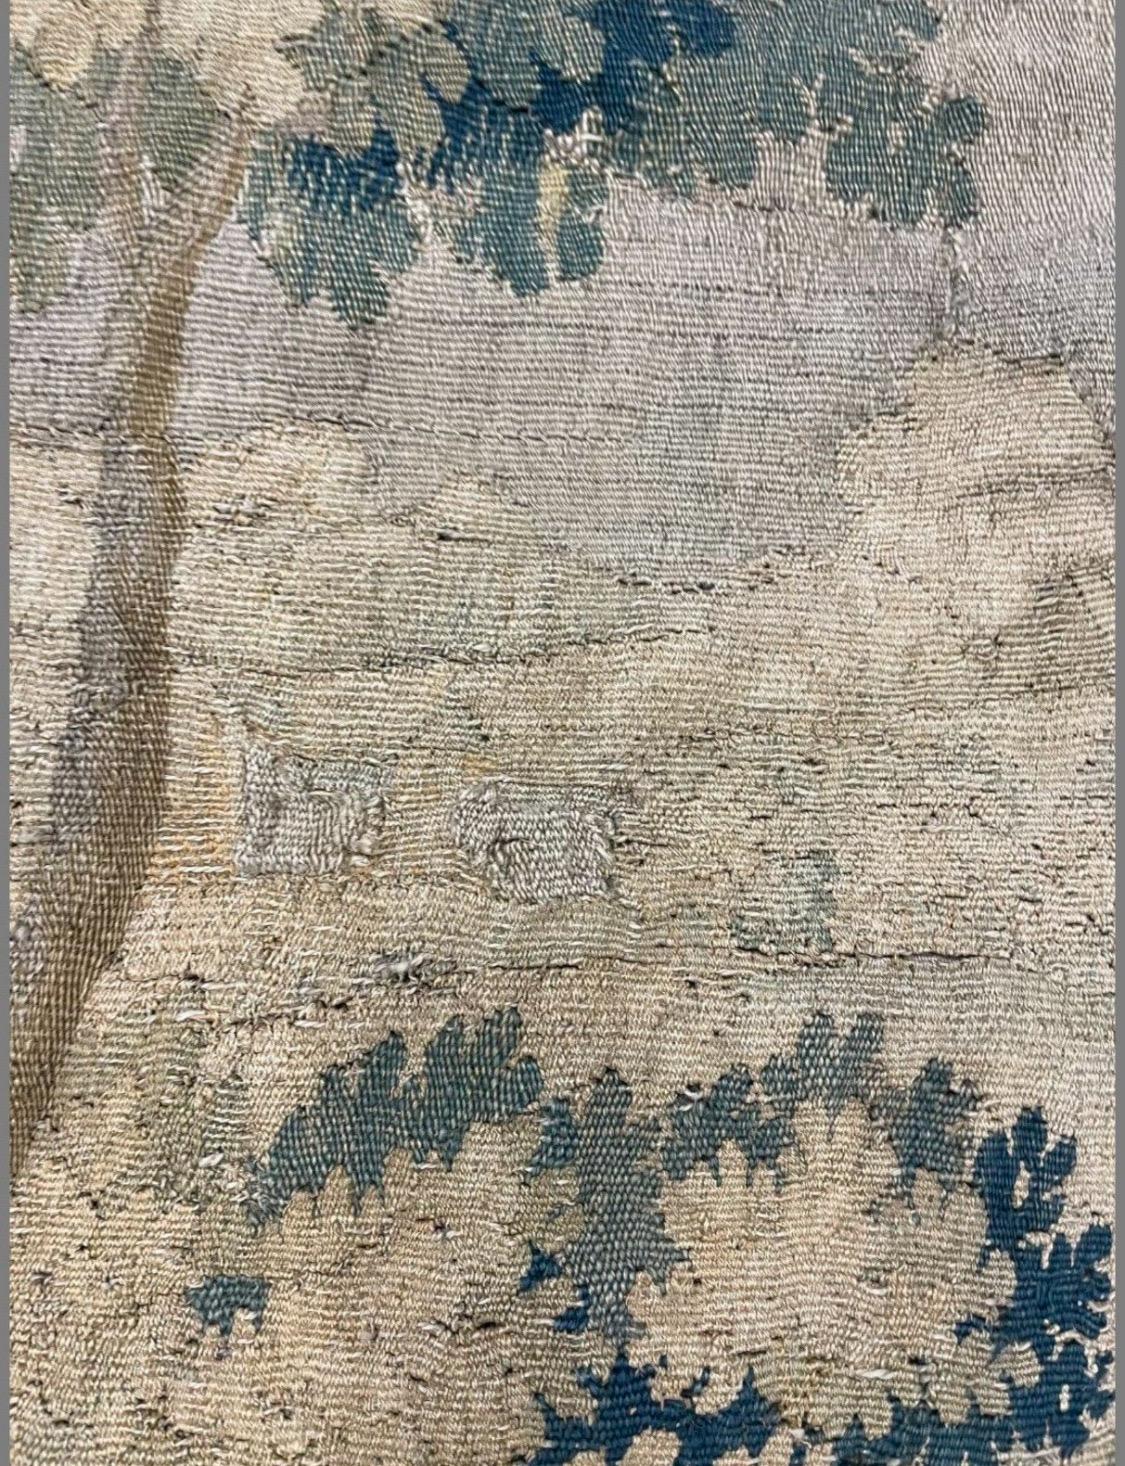 Baroque Early 17th Century Flemish Verdure Landscape Tapestry with Birds For Sale